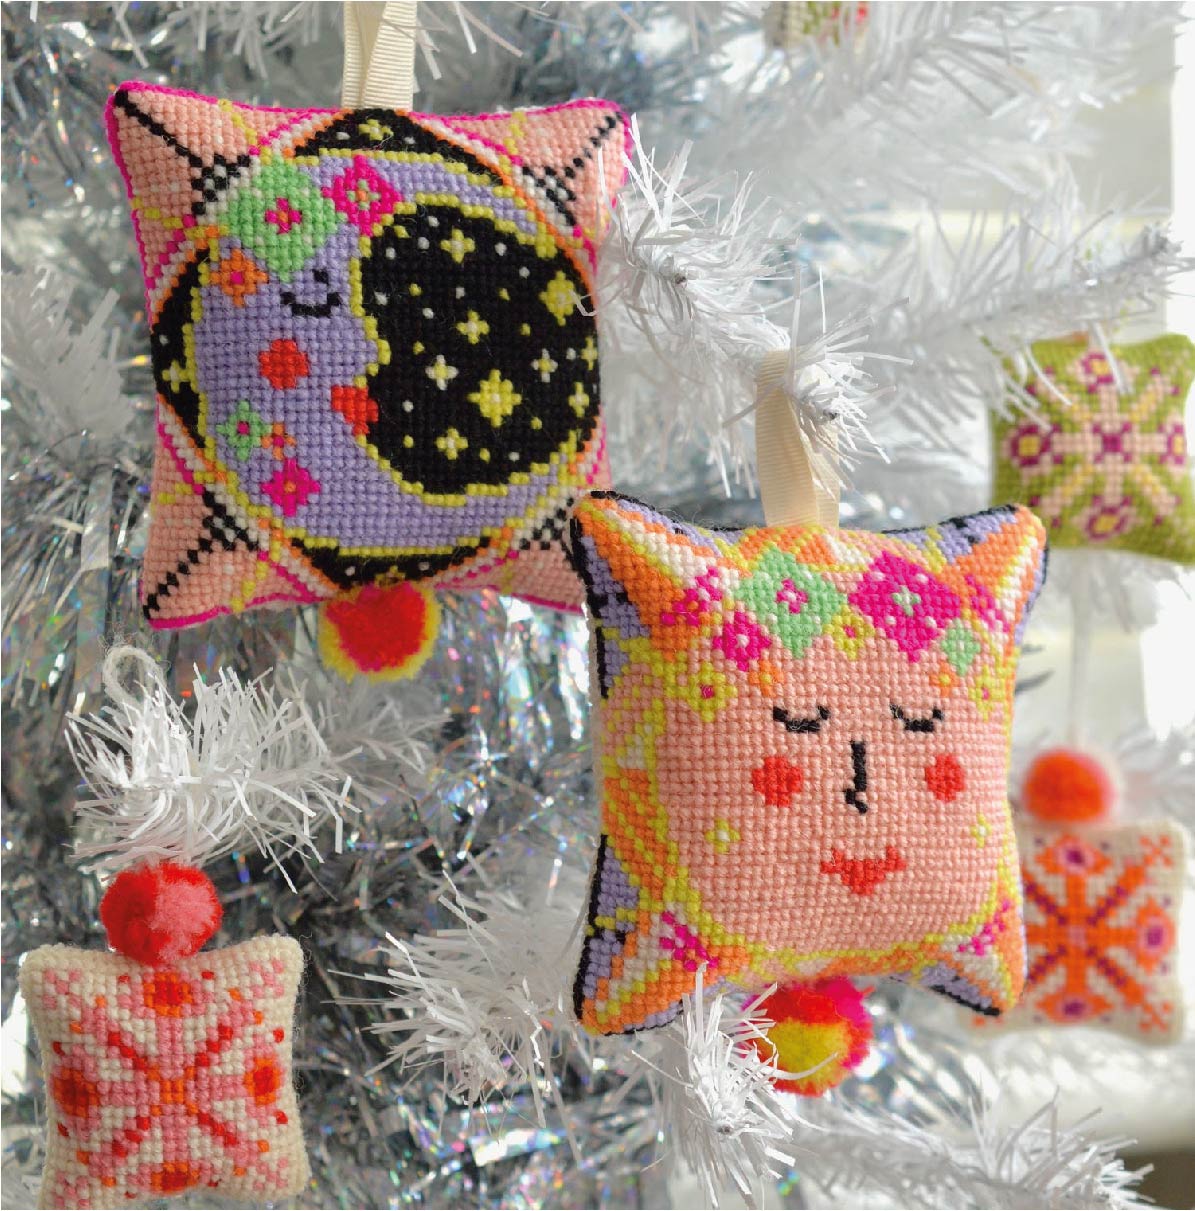 Sun and moon tapestry kit decorations adorning a Christmas tree, featuring the sun and moon designs adding a celestial touch to the holiday season.